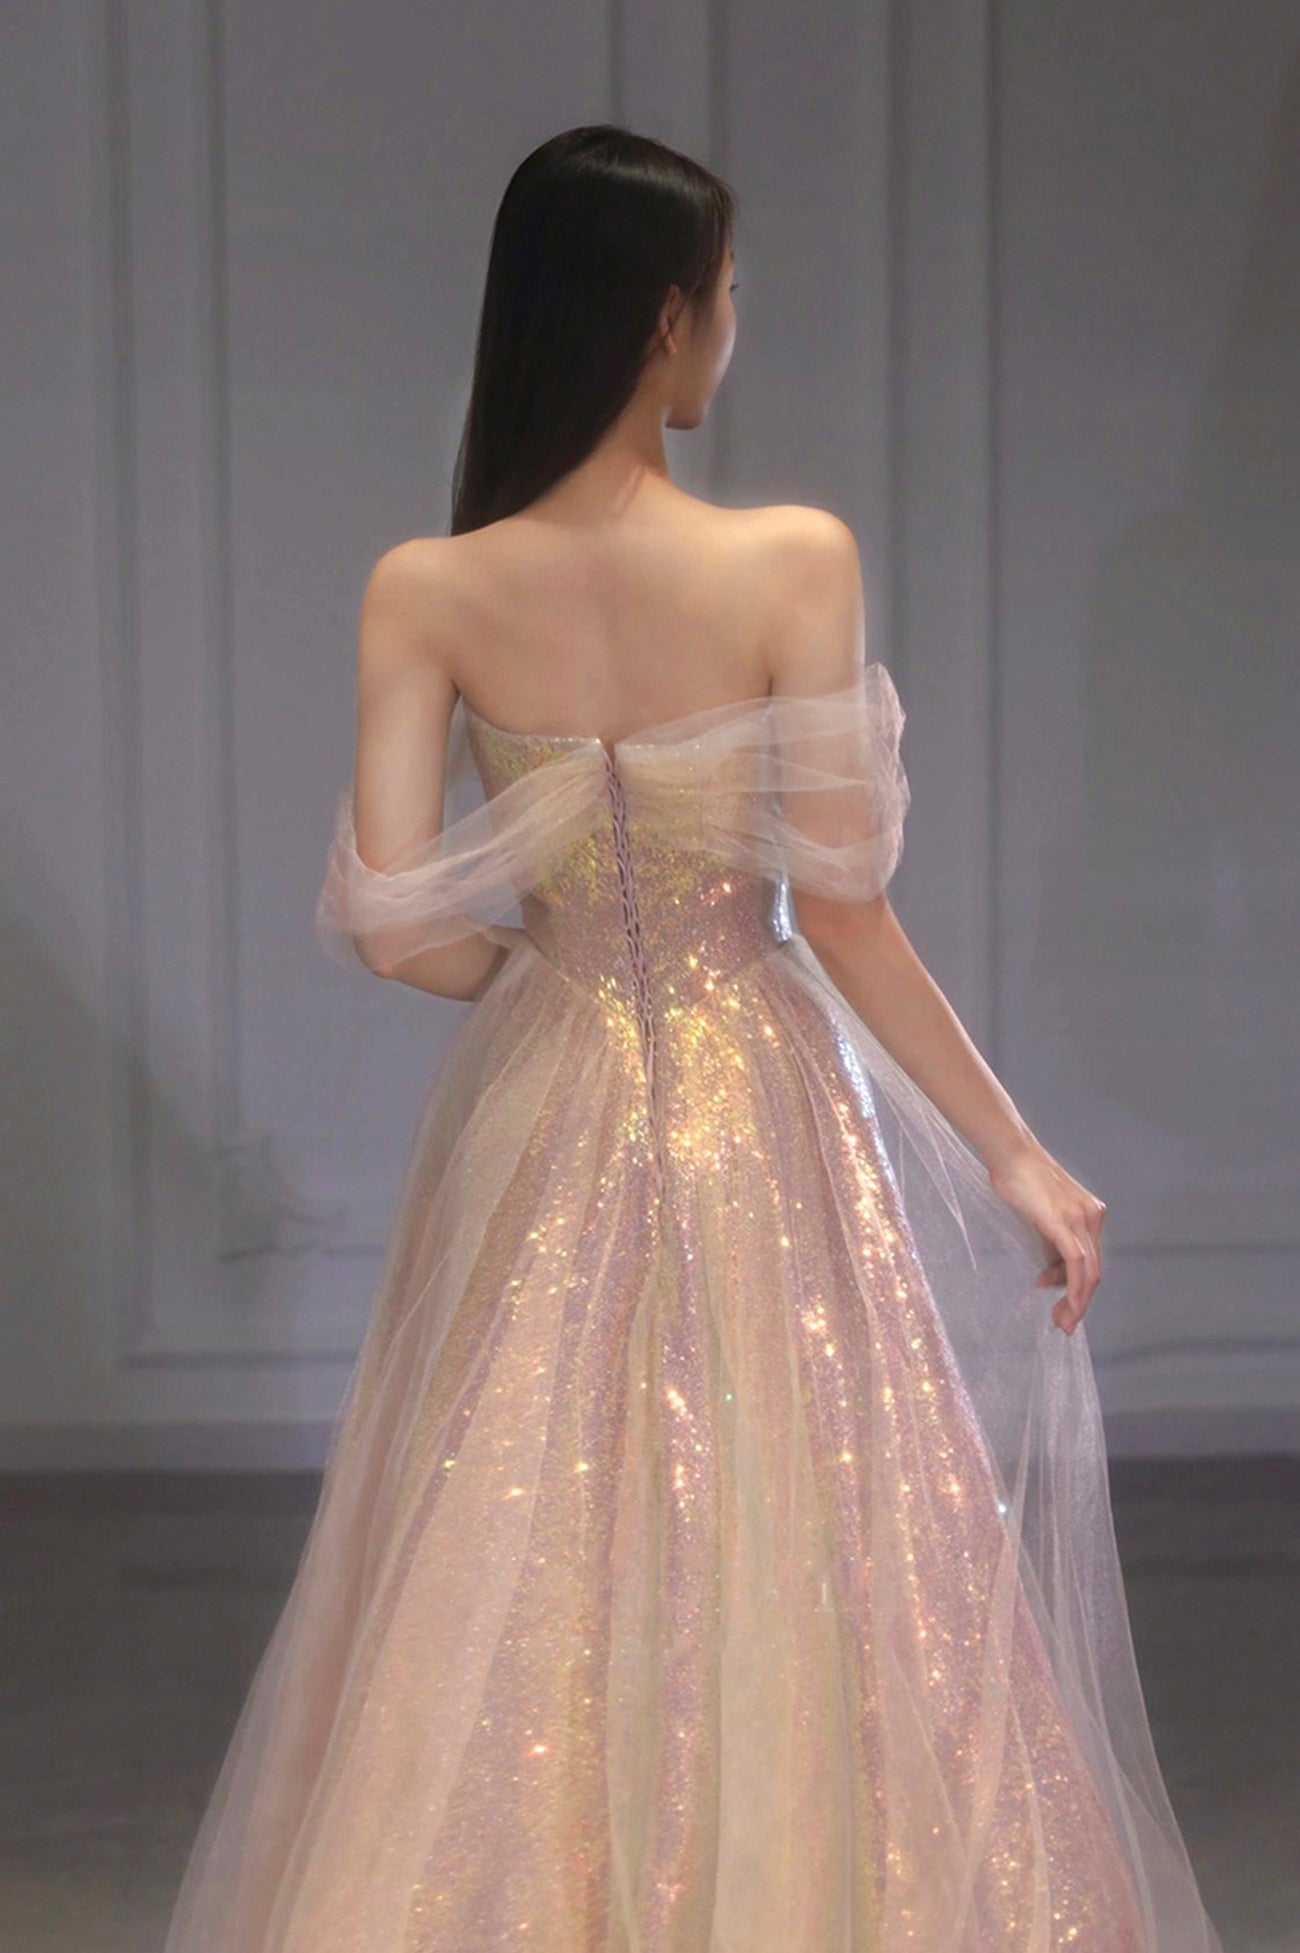 Shiny Tulle Long Prom Dress with Sequins, Off the Shoulder Evening Dress